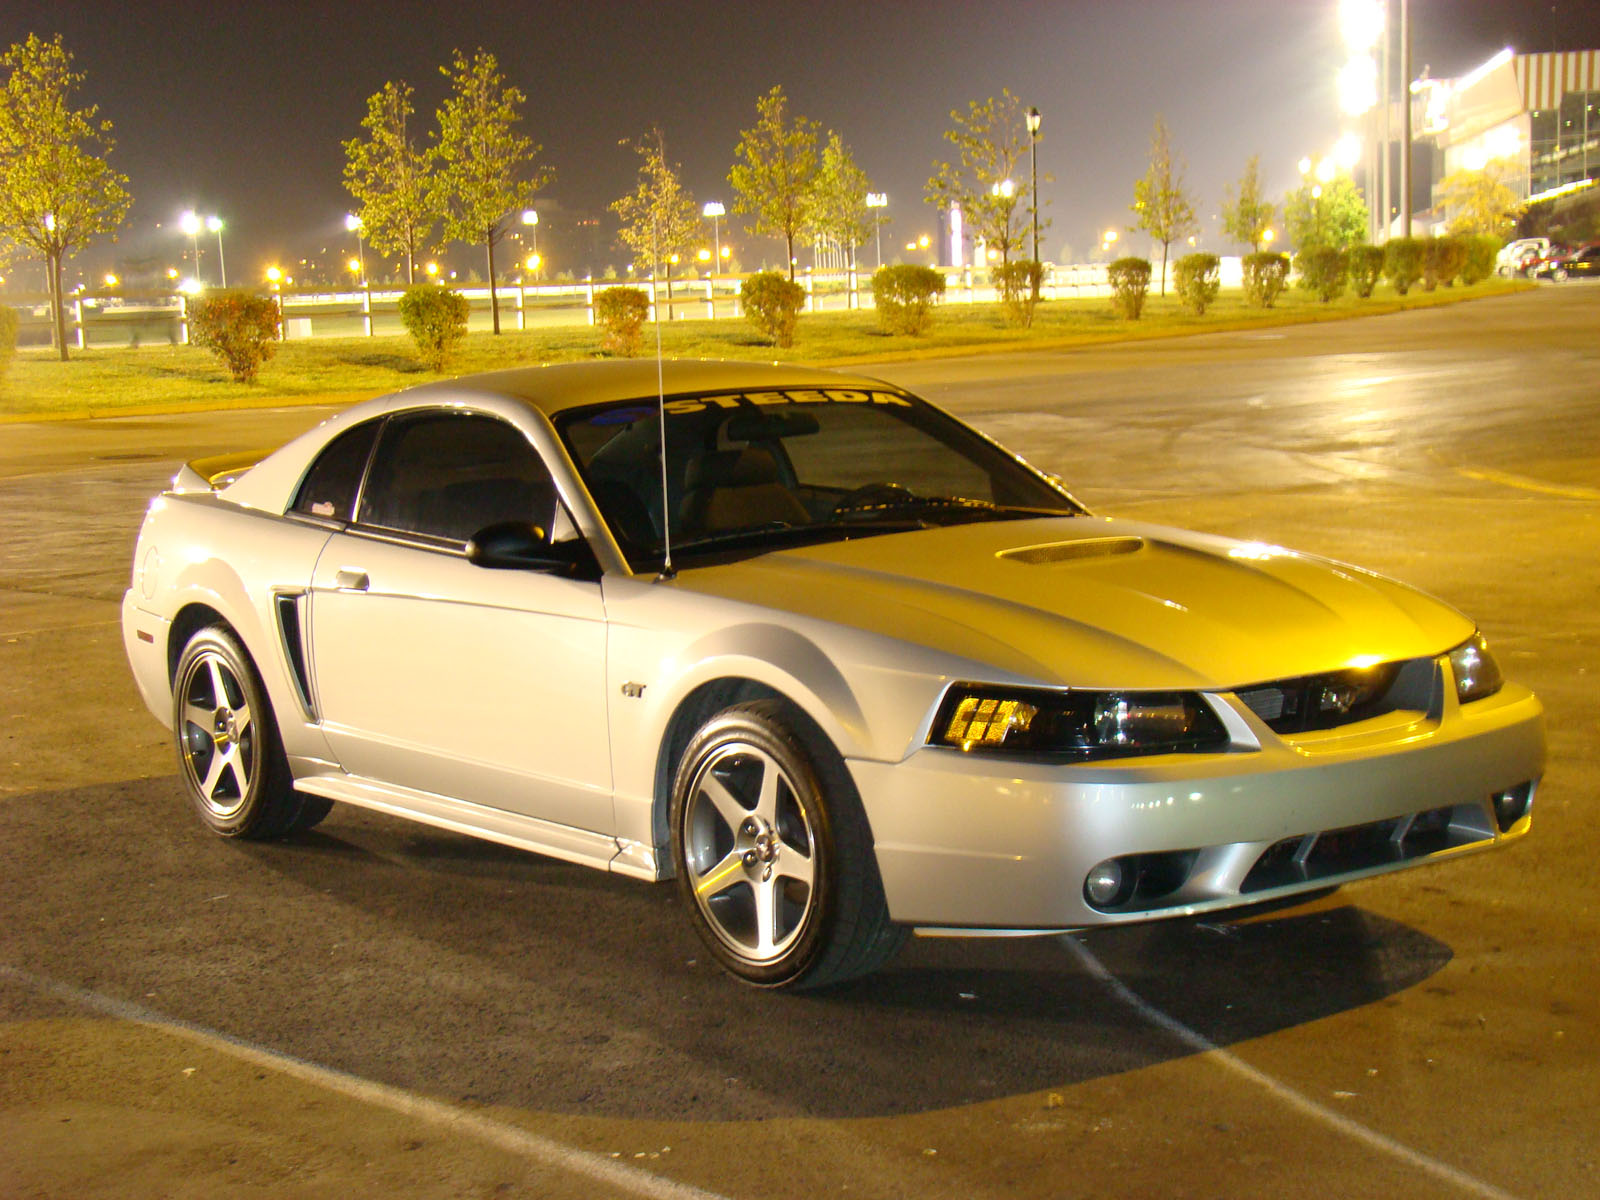 2000 Ford mustang 0-60 times #6